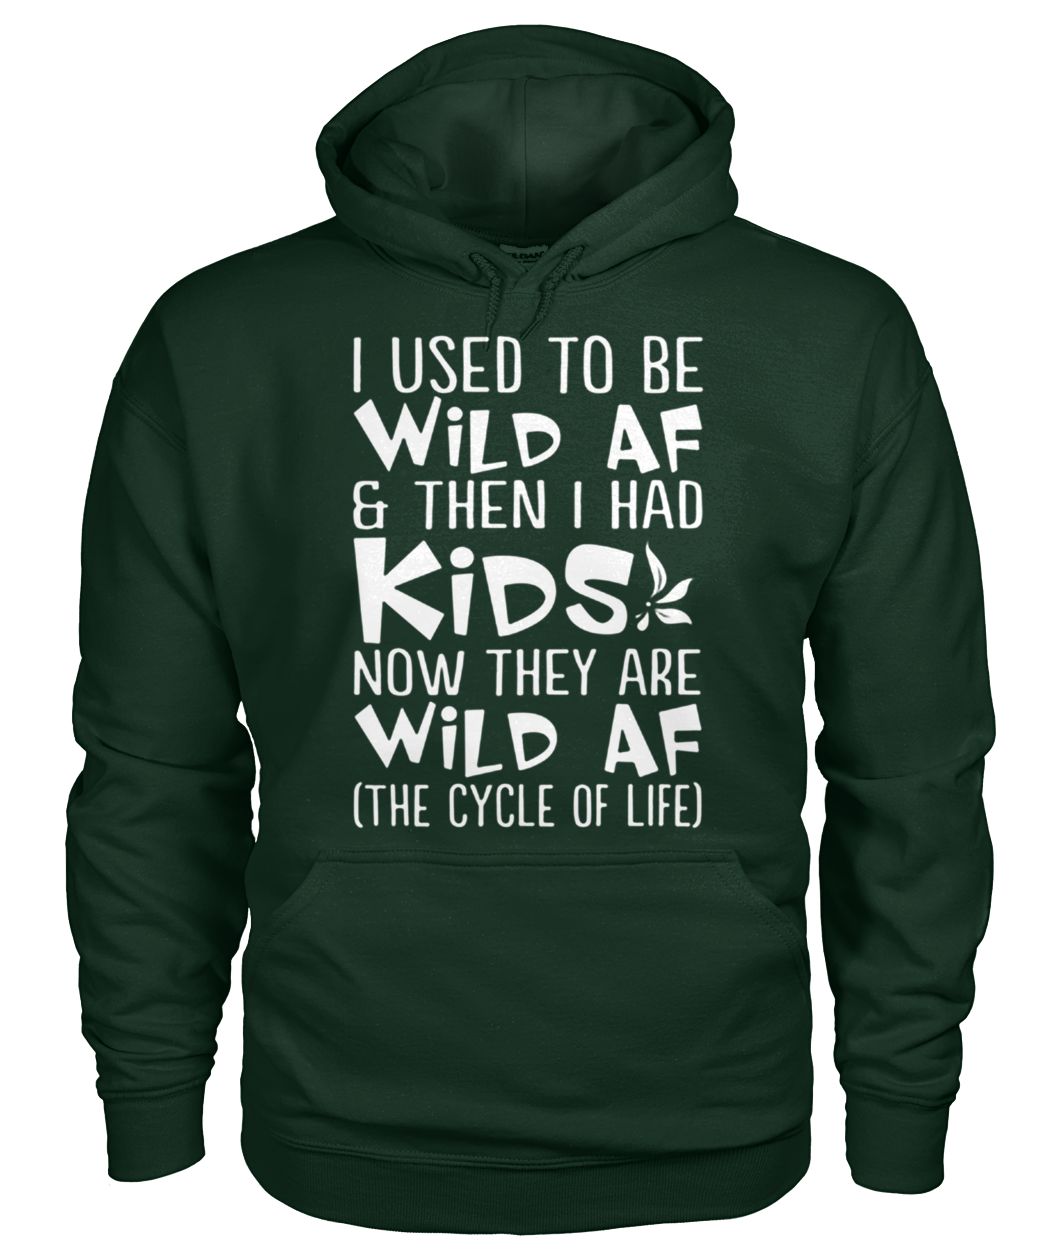 I used to be wild af and then I had kids now they are wild af the cycle of life gildan hoodie